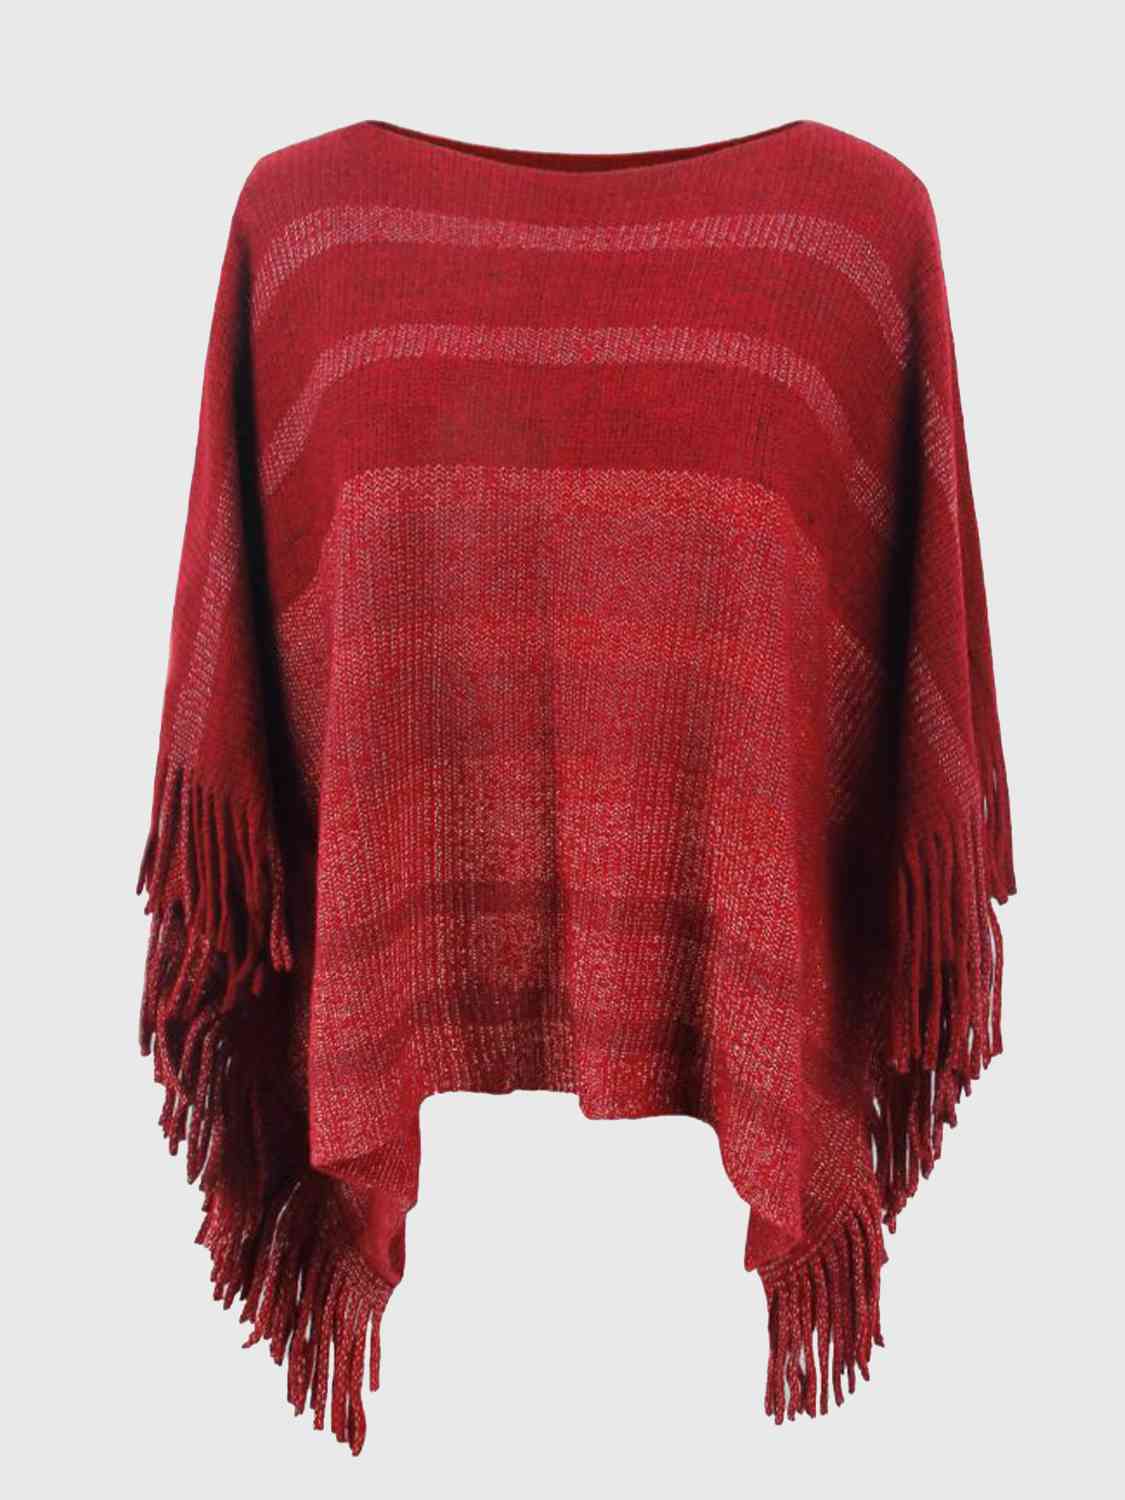 Striped Boat Neck Poncho with Fringes Print on any thing USA/STOD clothes